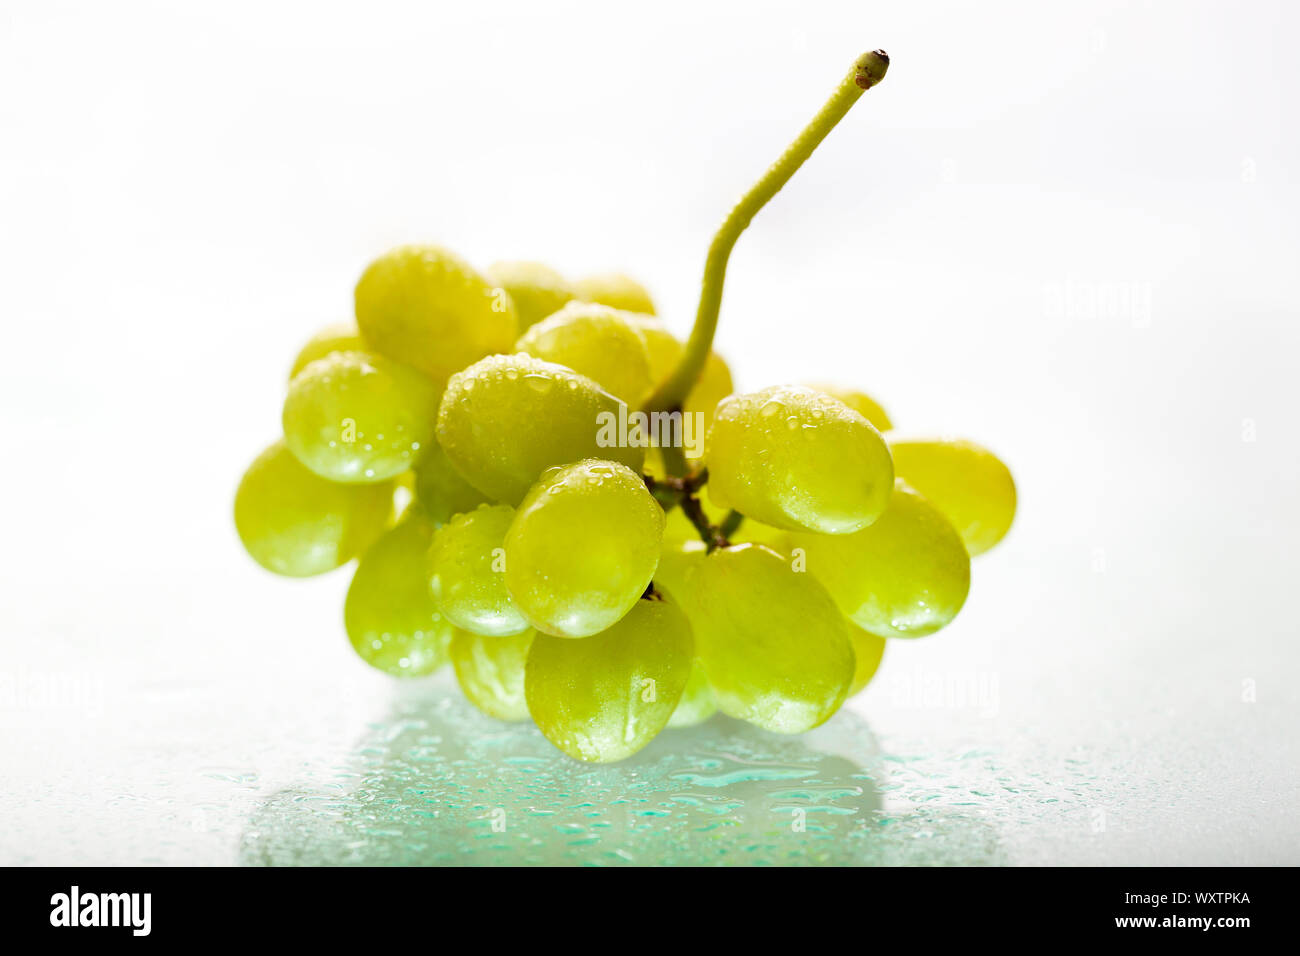 Bunch of wet white grapes from Greece with reflection on a glass table Stock Photo